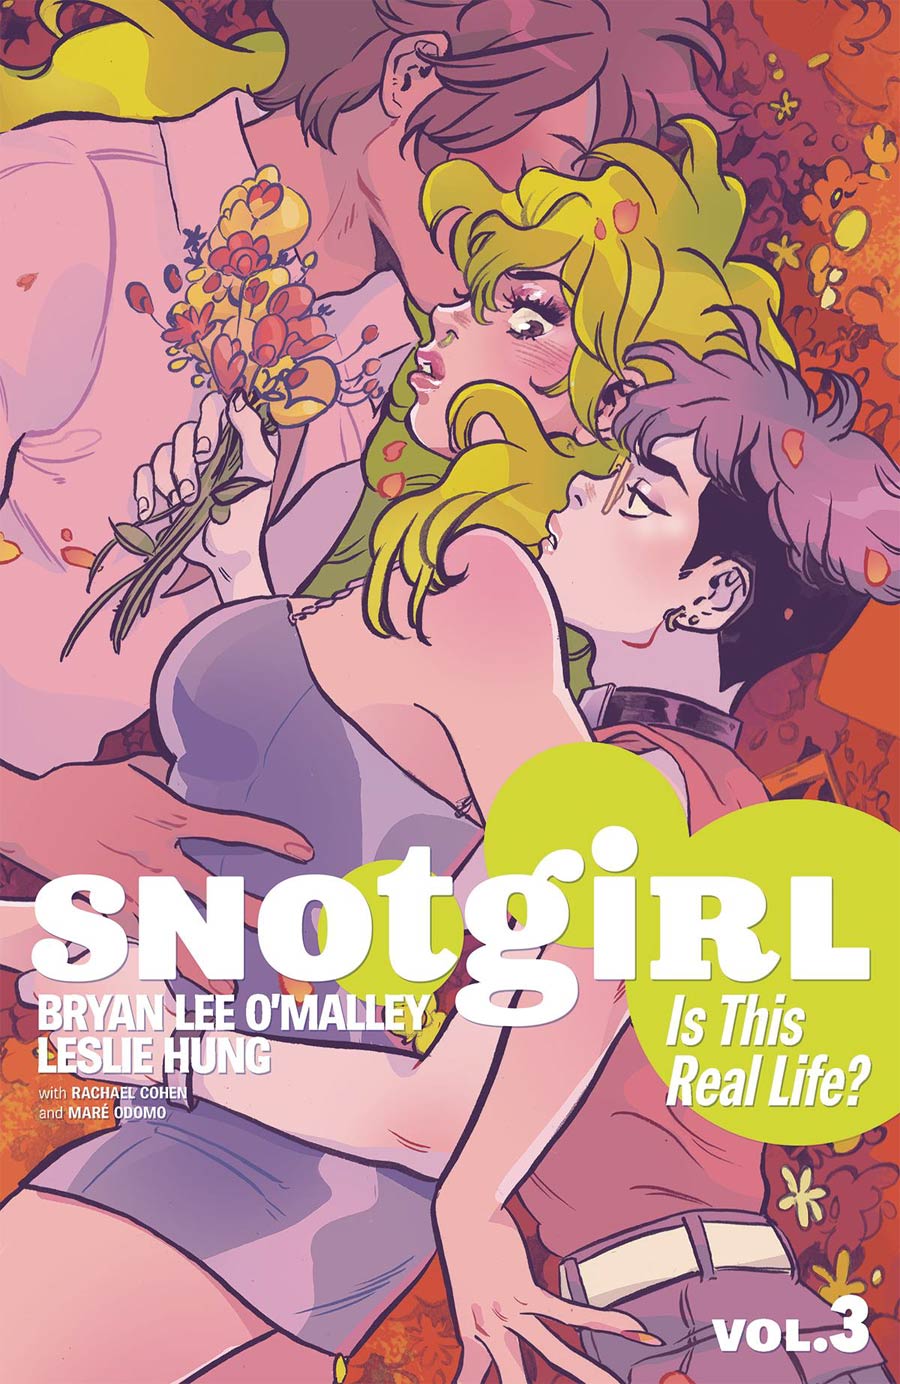 Snotgirl Vol 3 Is This Real Life TP